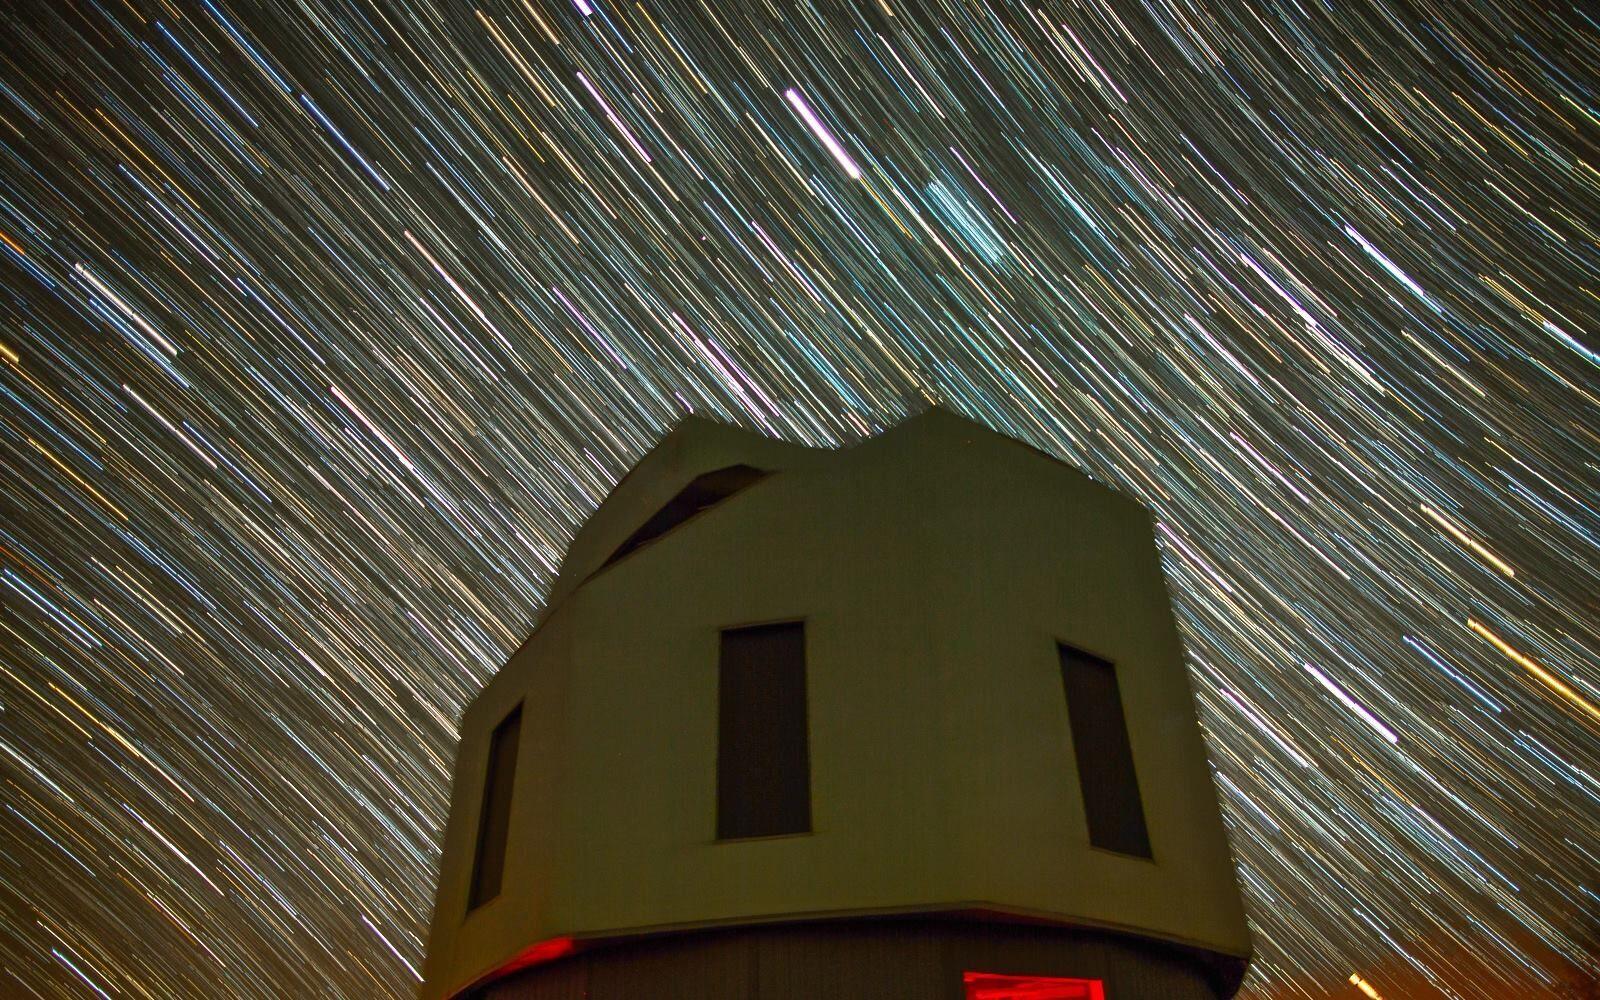 The image shows star trails over the Lowell Discovery Telescope dome. Joe Llama